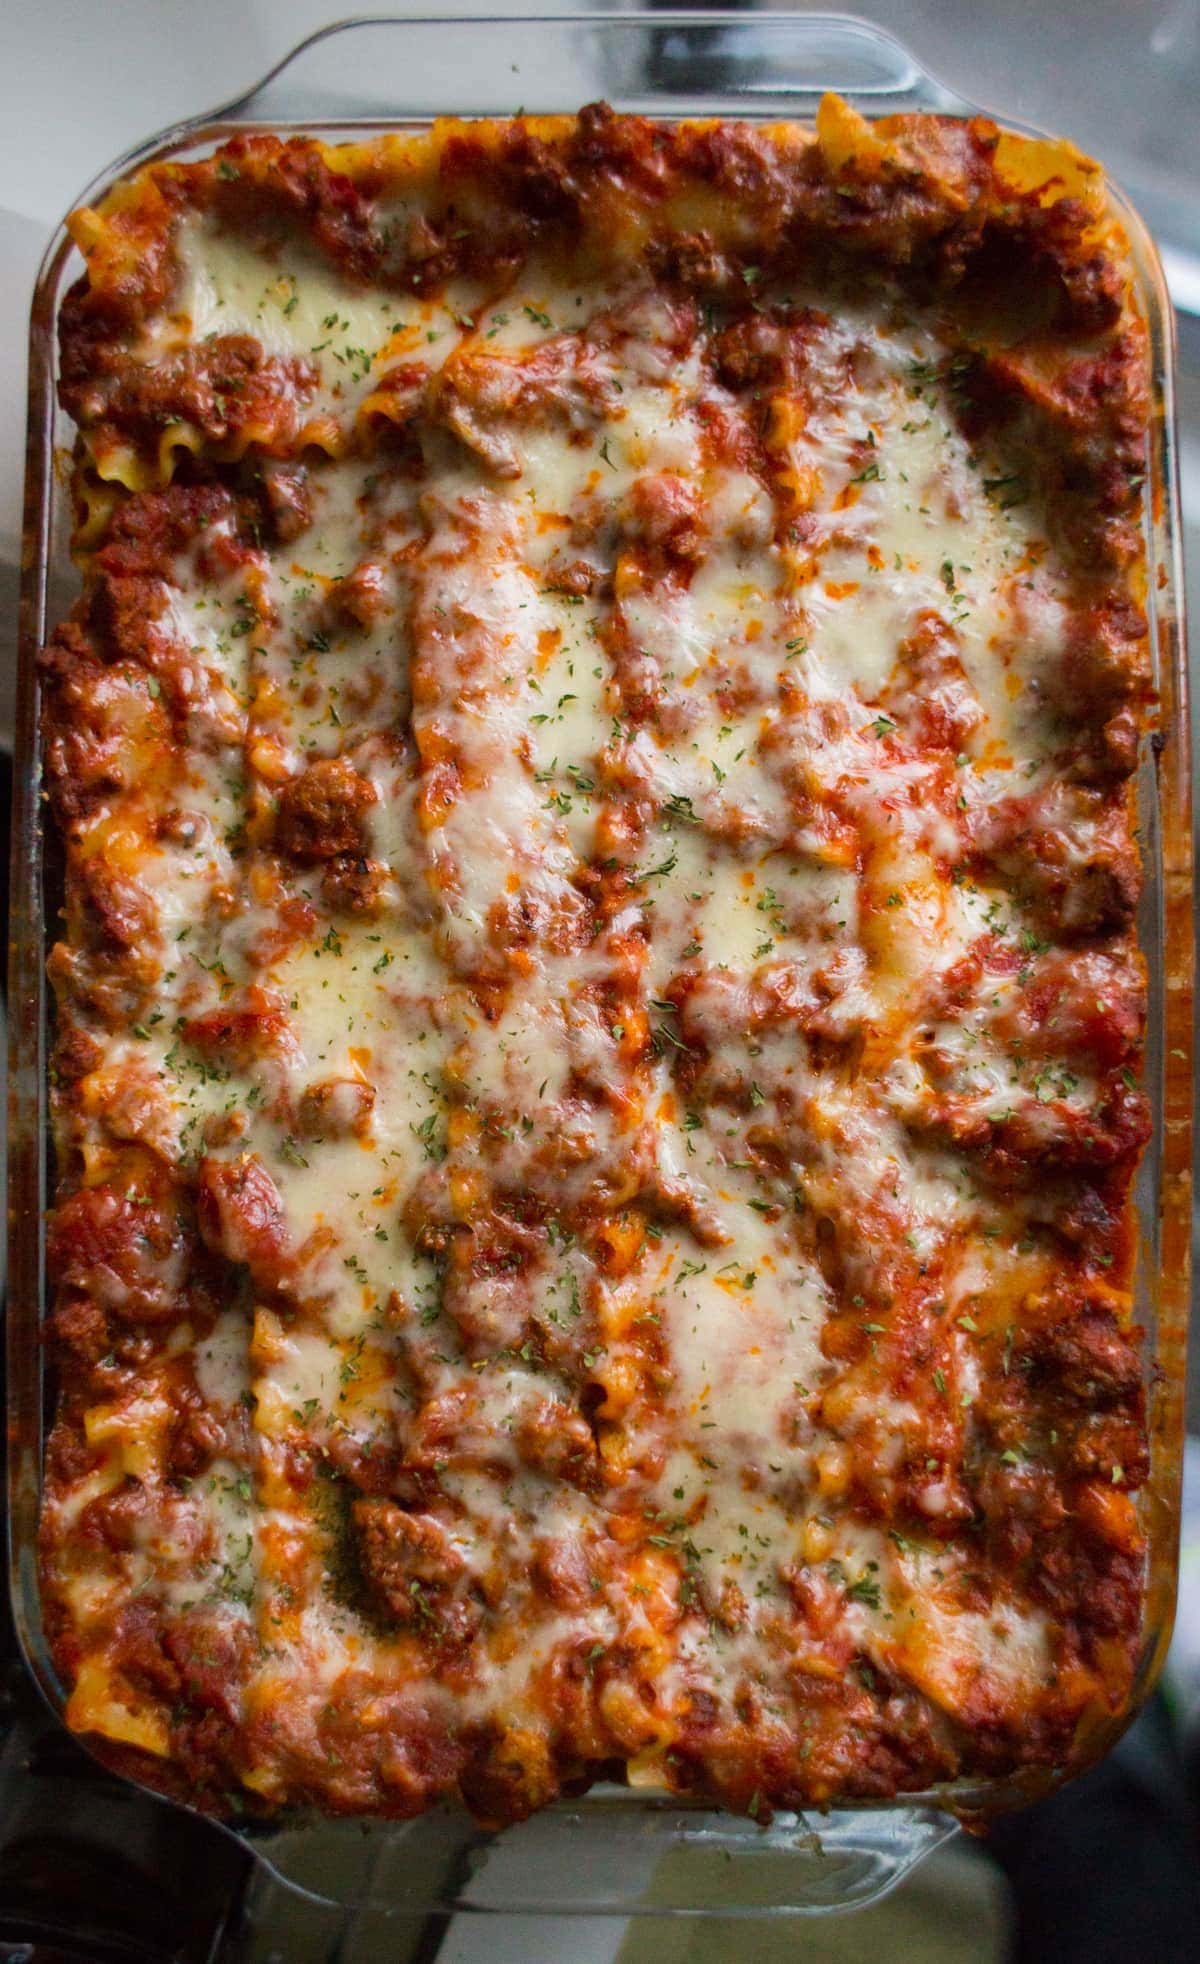 Top down view of baked lasagna in a glass baking dish